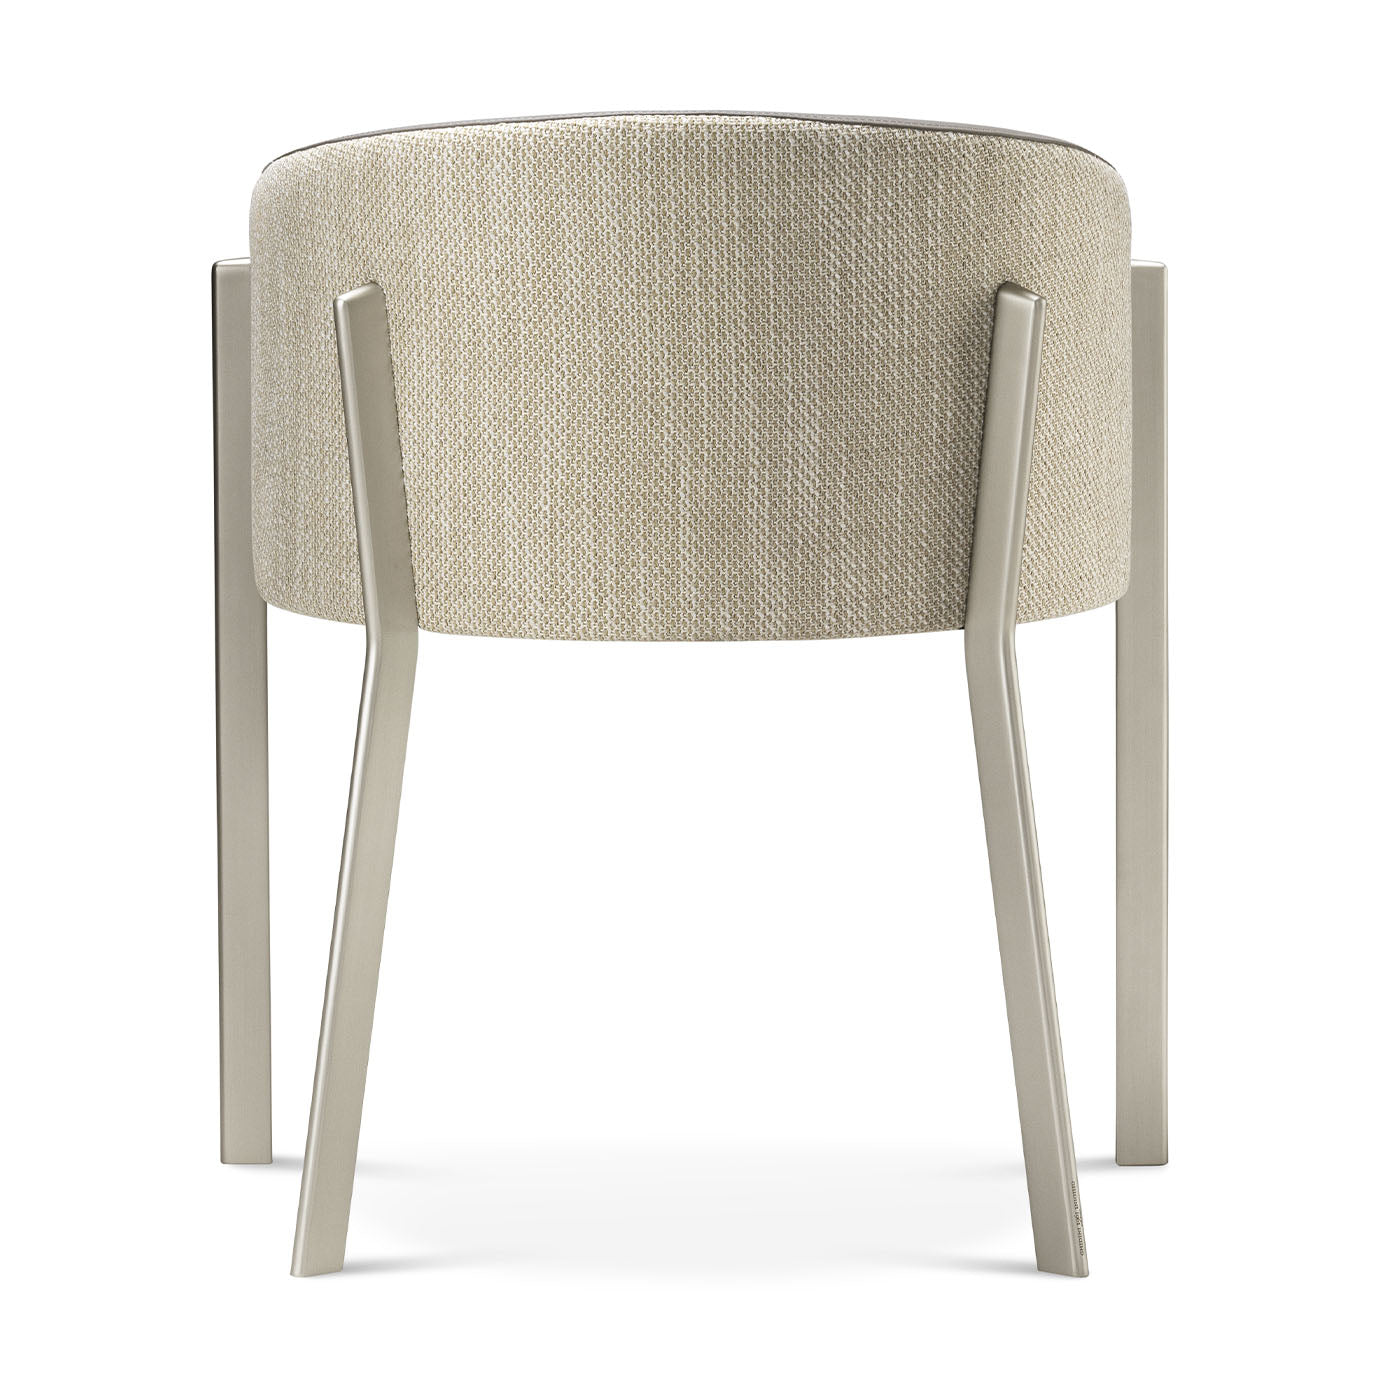 Arch Gray Leather Armchair by Richard Hutten - Alternative view 2